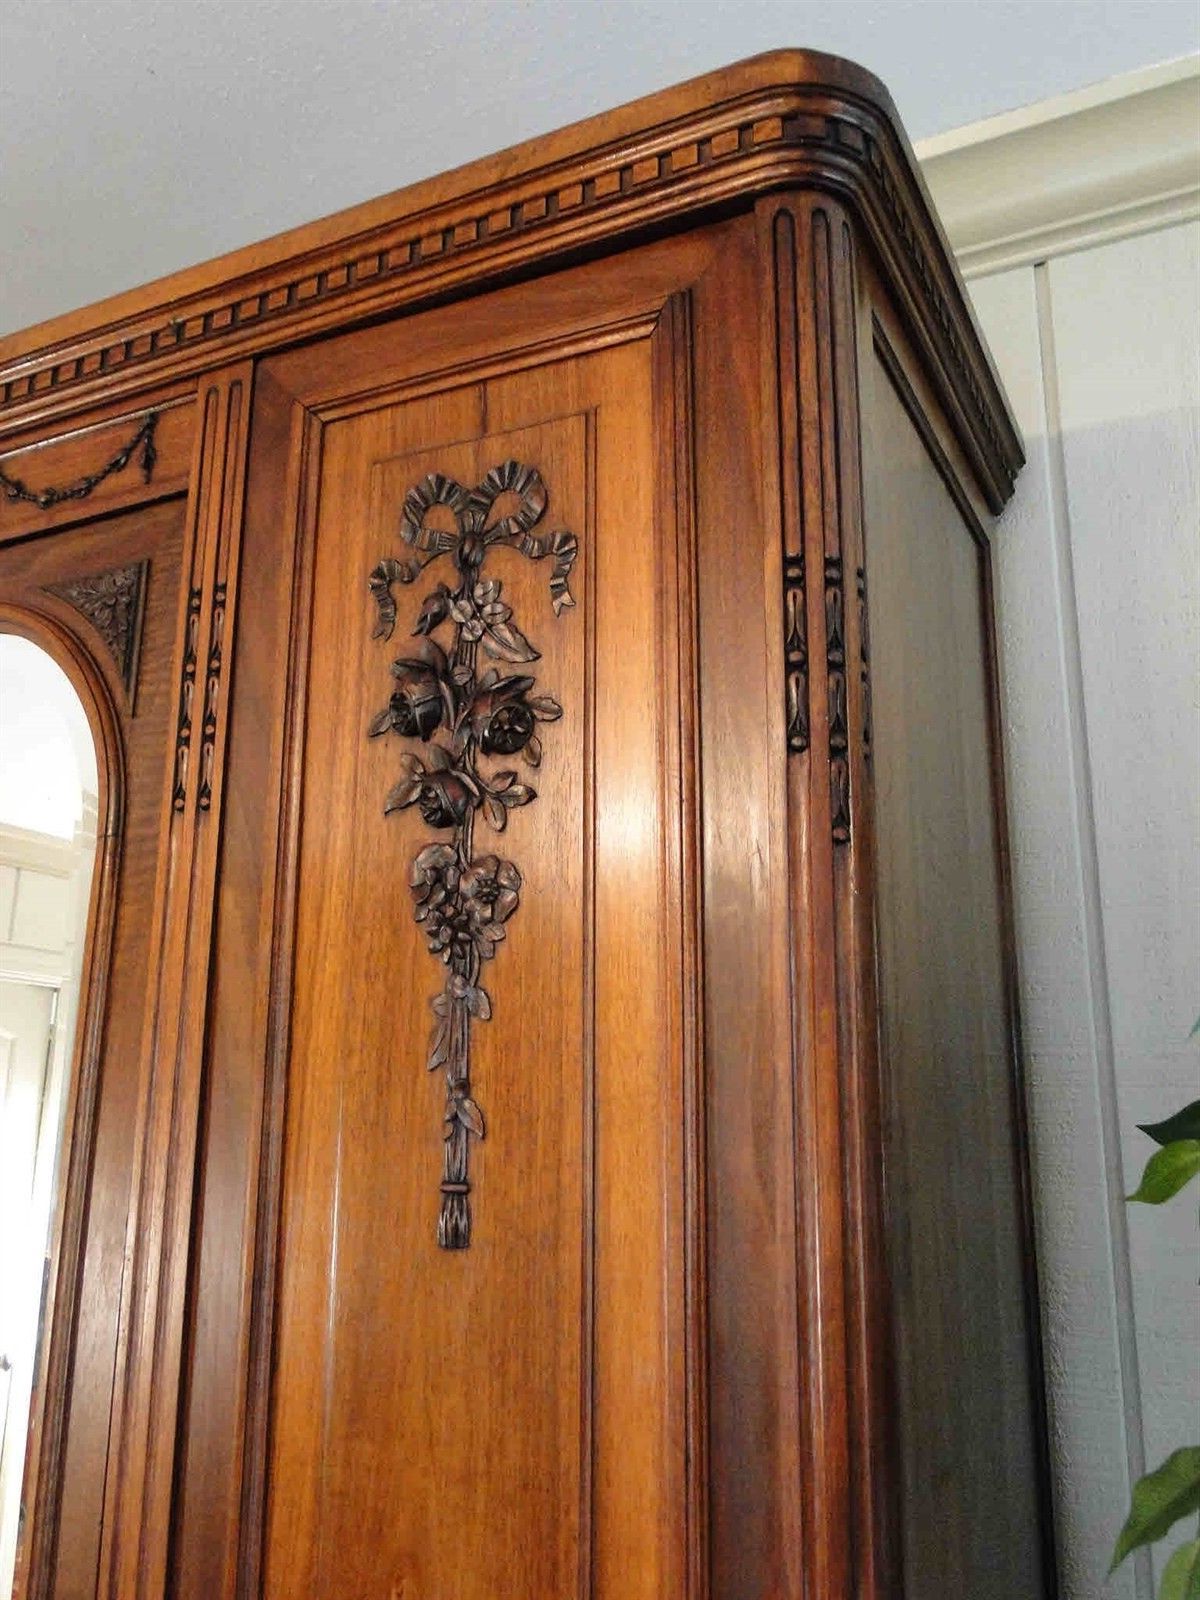 Antique French Armoire Wardrobe Large Beveled Mirror 3 Door Walnut Floral  Carved Throughout Armoire French Wardrobes (Gallery 13 of 20)